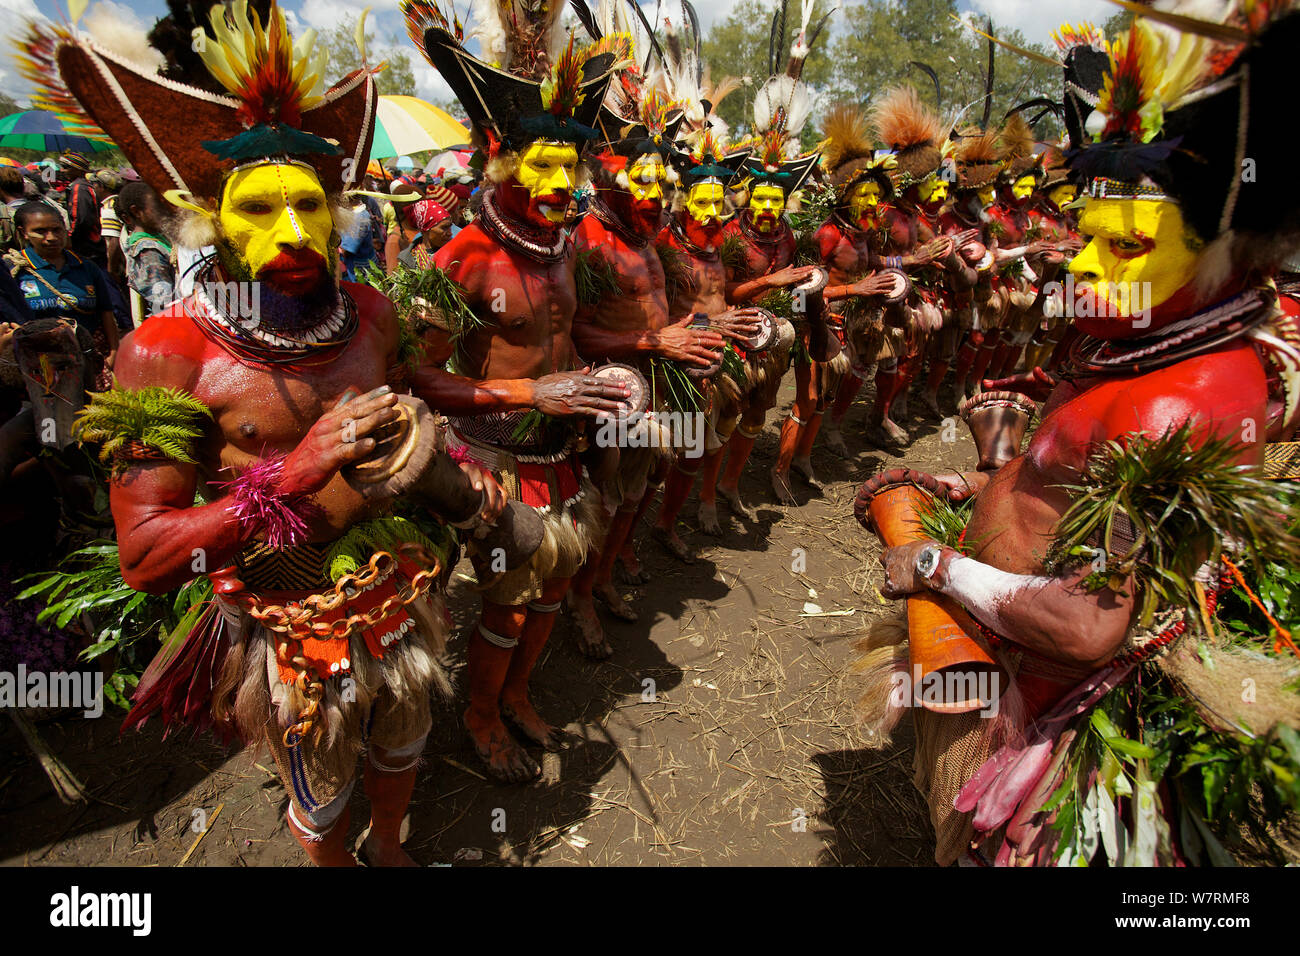 Huli 'singsing' dance ceremony. Huli wigmen wearing human hair wigs and feathers of various birds of paradise and other bird species. Tari Valley, Southern Highlands Province, Papua New Guinea. November 2010 Stock Photo